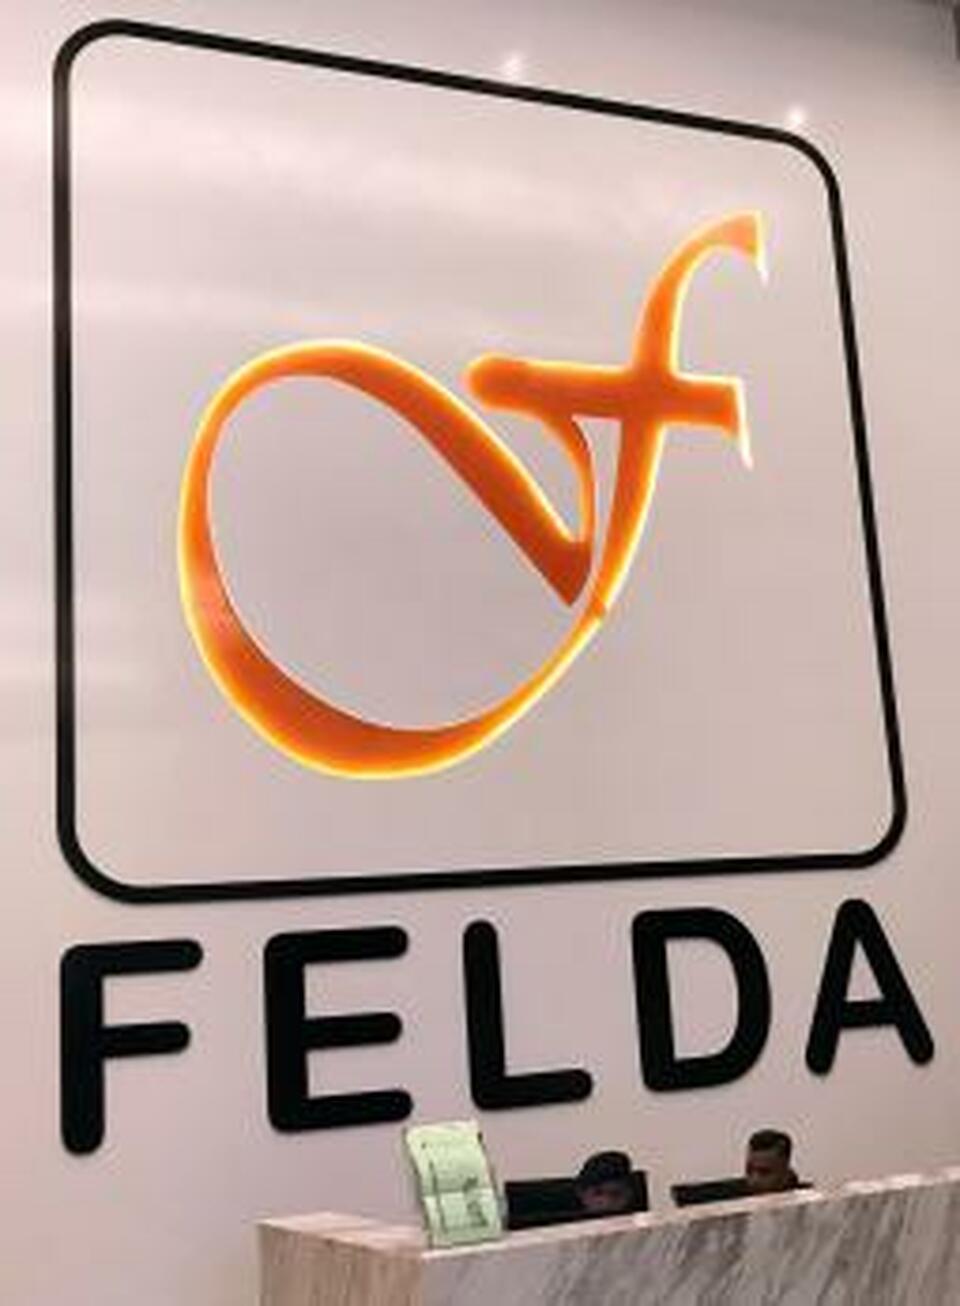 Malaysia's Federal Land Development Authority (Felda) said on Thursday (20/09) that it will sell assets, including property in London, restructure some loans and try to boost cashflow in a bid to trim debts of nearly $2 billion. (Reuters Photo/Emily Chow)